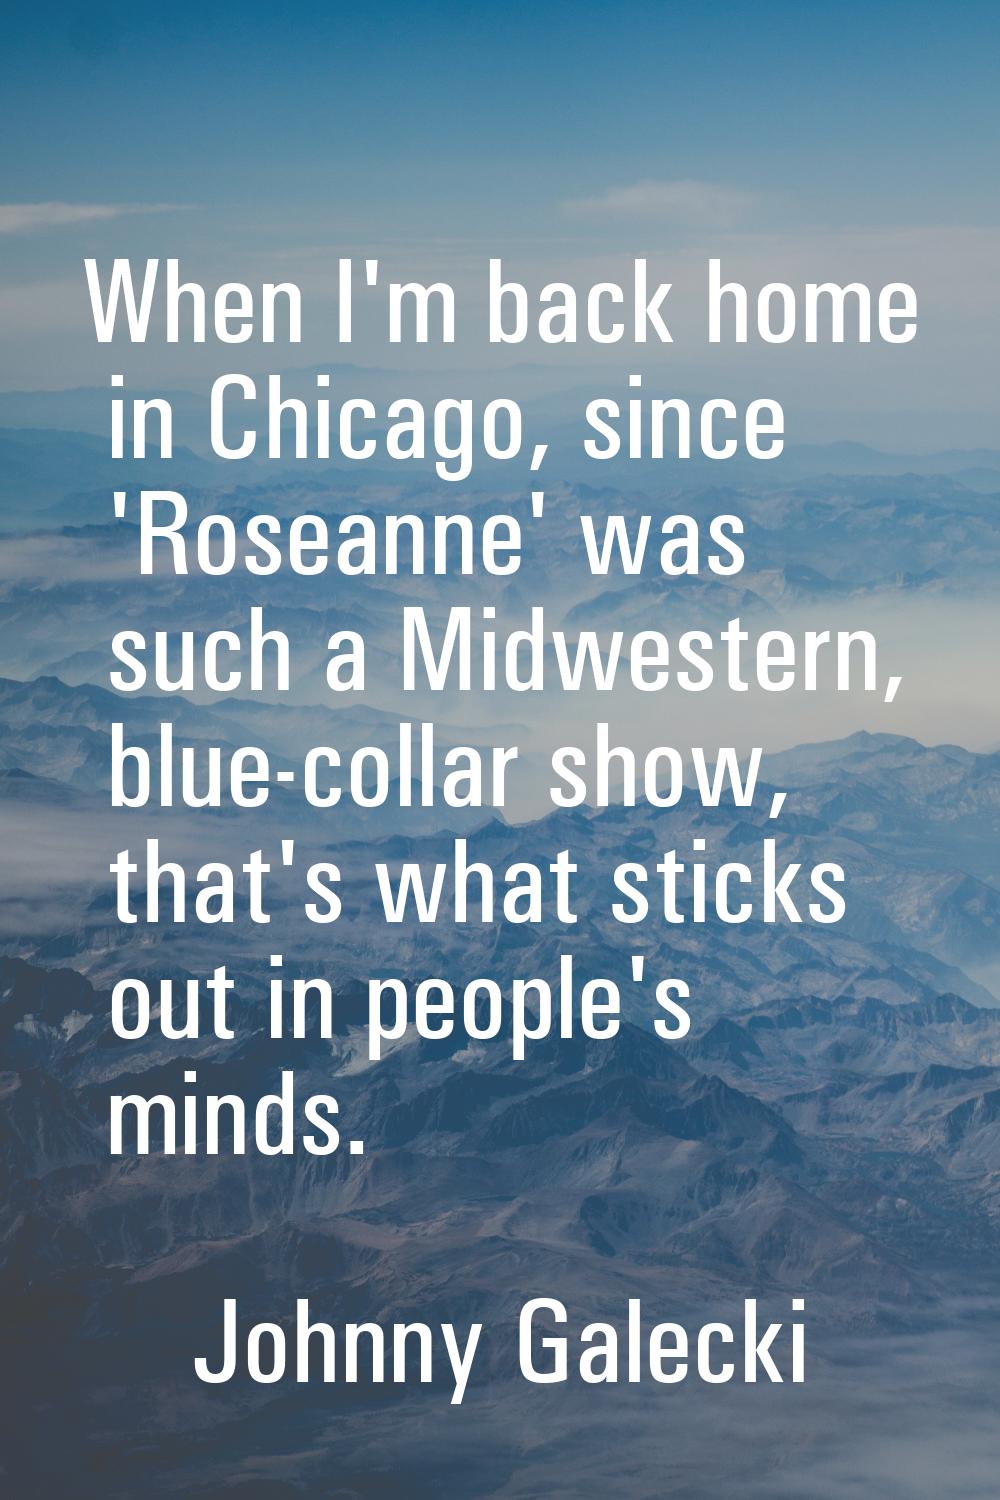 When I'm back home in Chicago, since 'Roseanne' was such a Midwestern, blue-collar show, that's wha